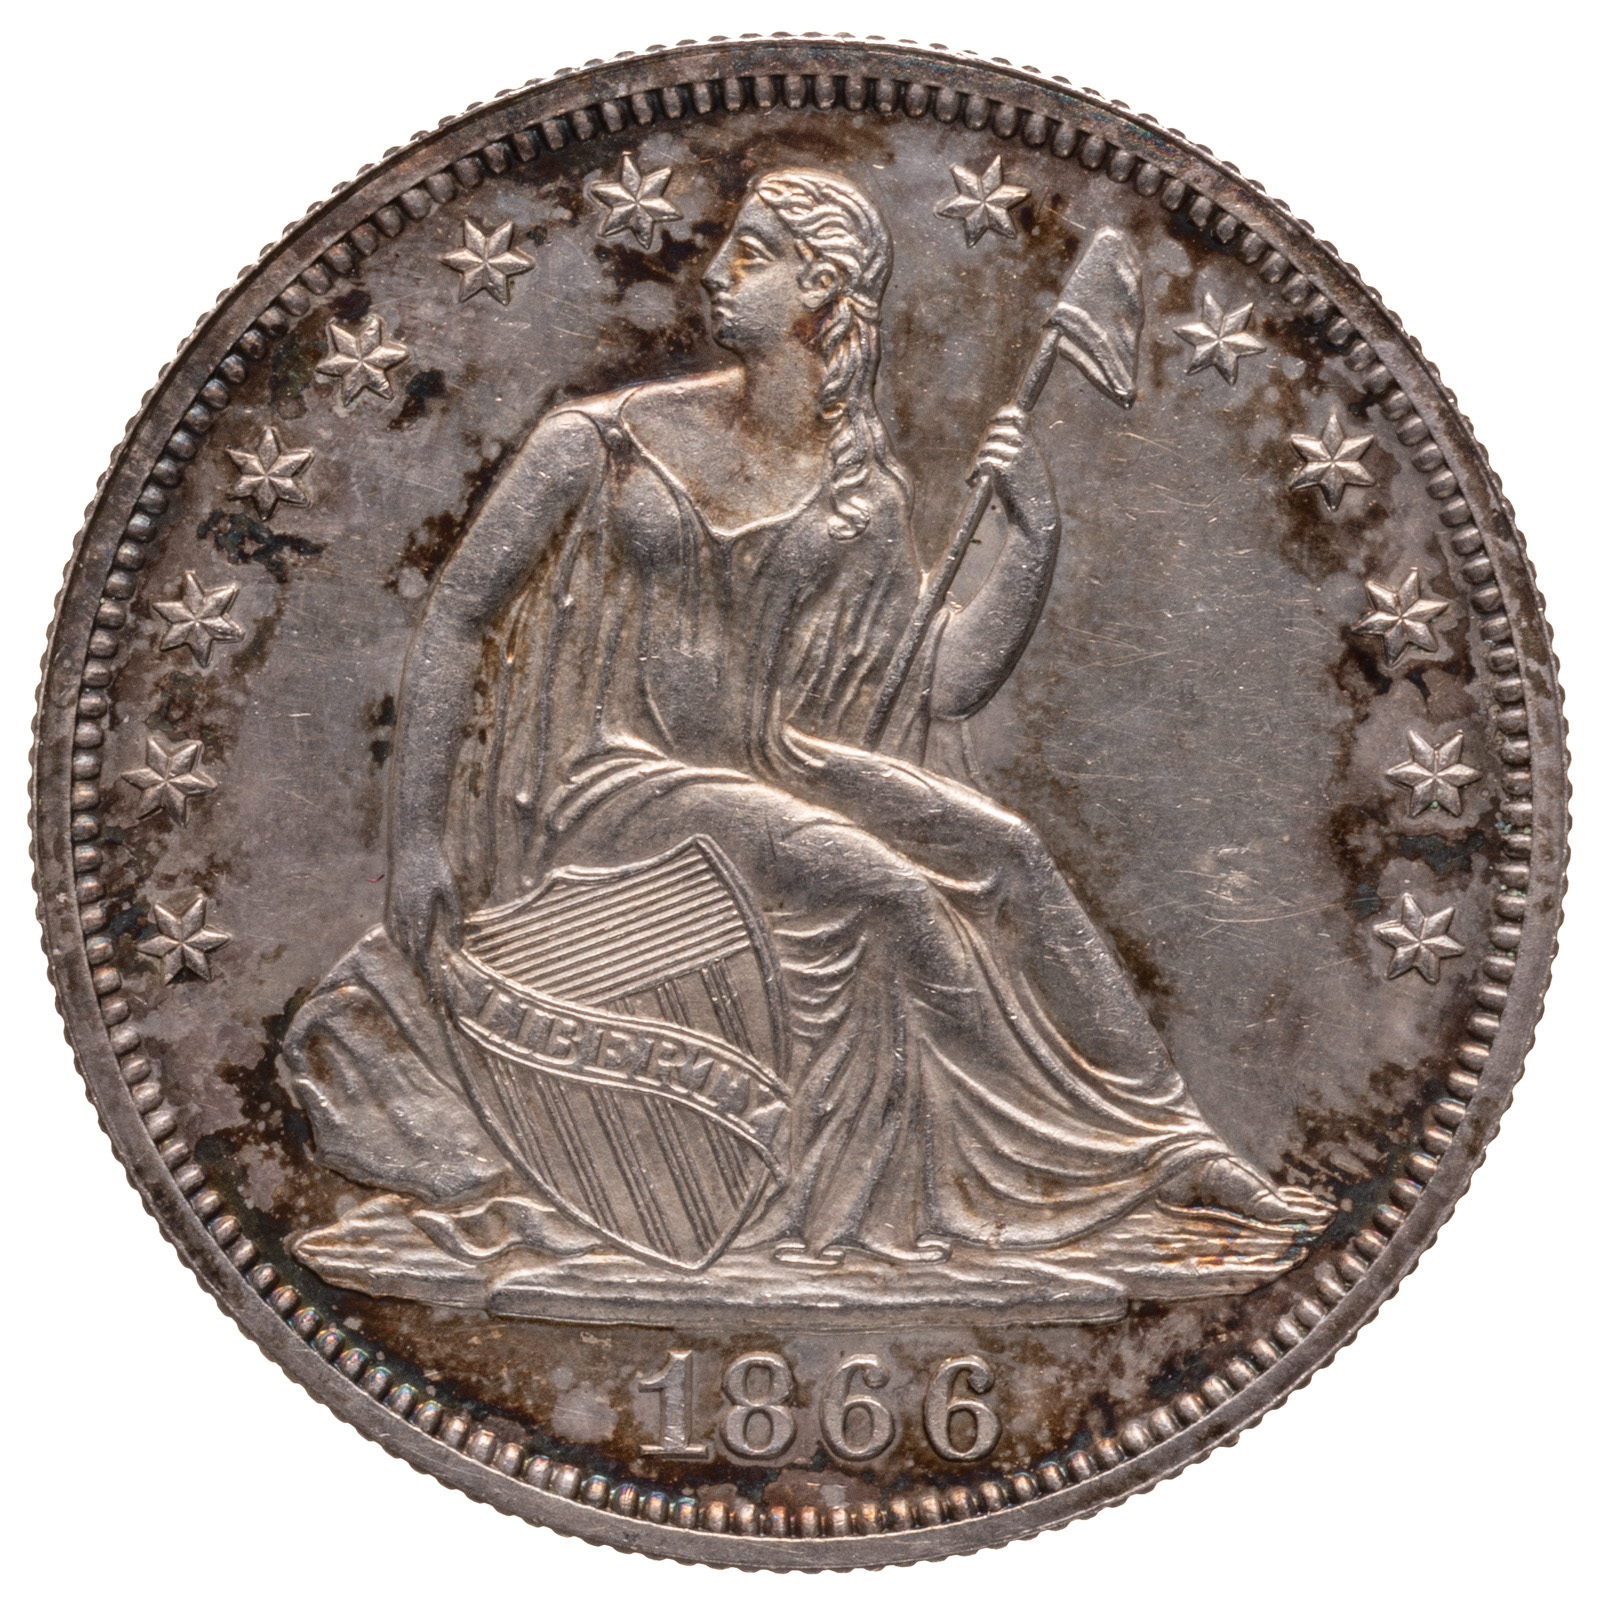 1866 SEATED HALF DOLLAR WITH MOTTO,